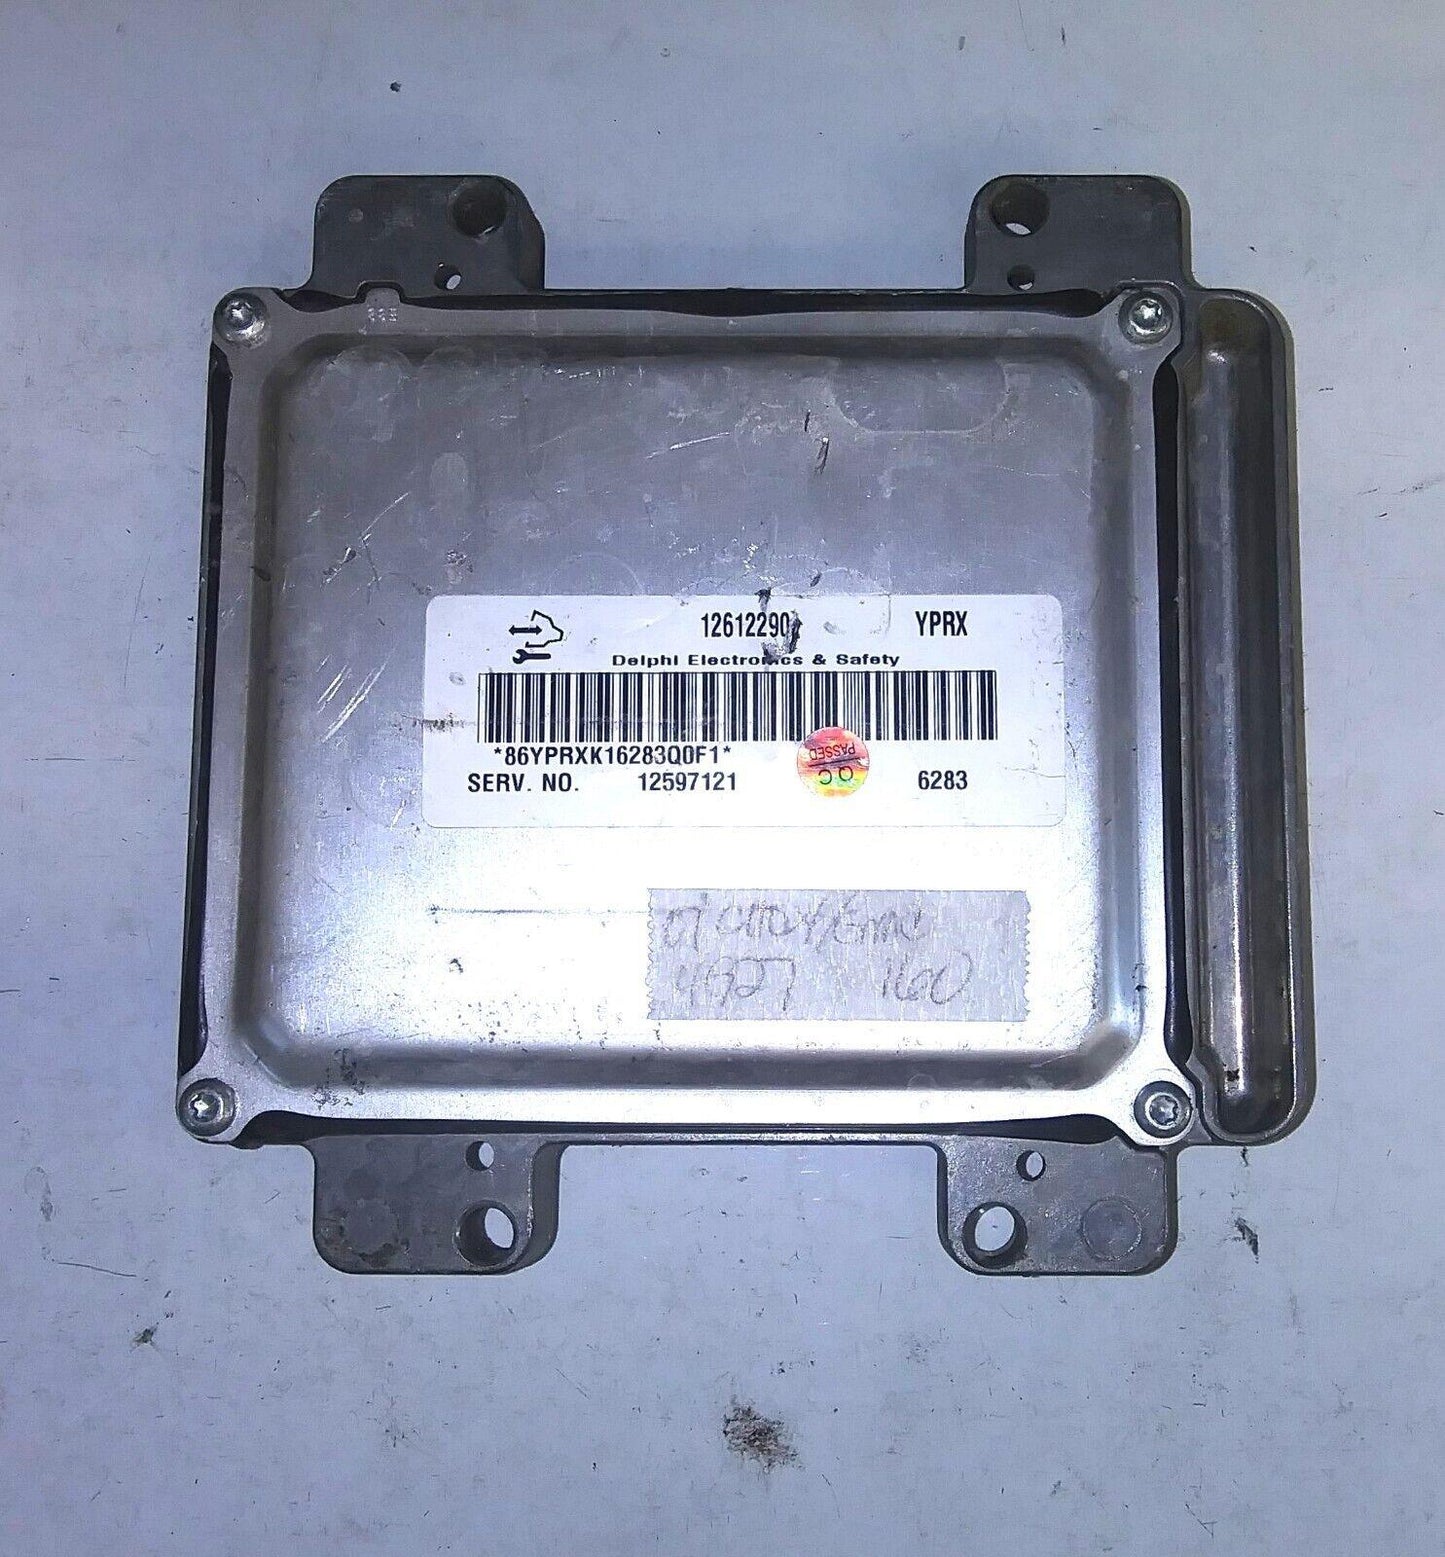 12612290 ecm ecu computer 2007 Chevy or GMC pickup **tested** - Swan Auto